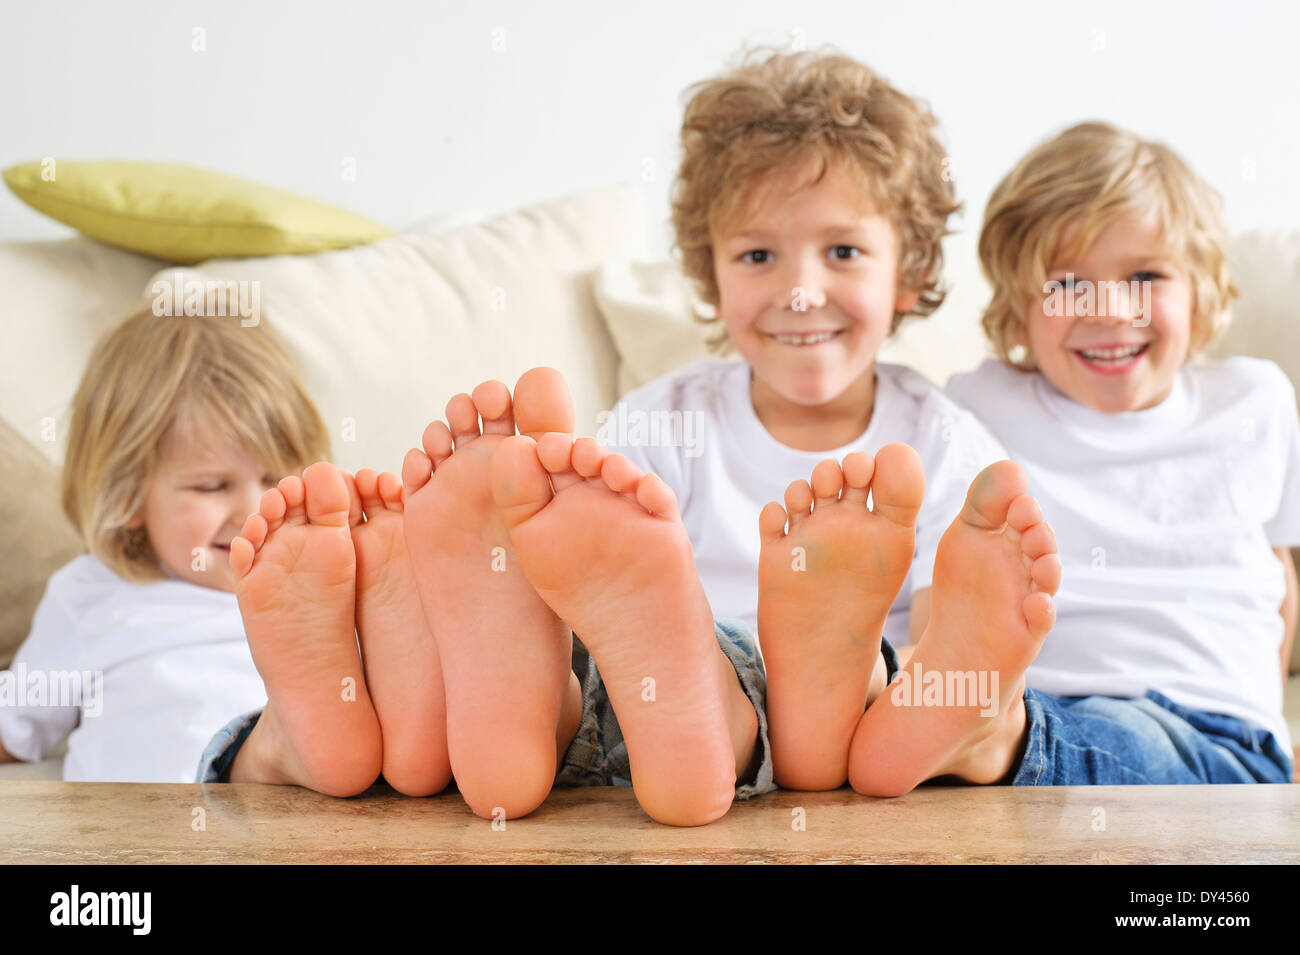 three you boys have their feet on the table Stock Photo